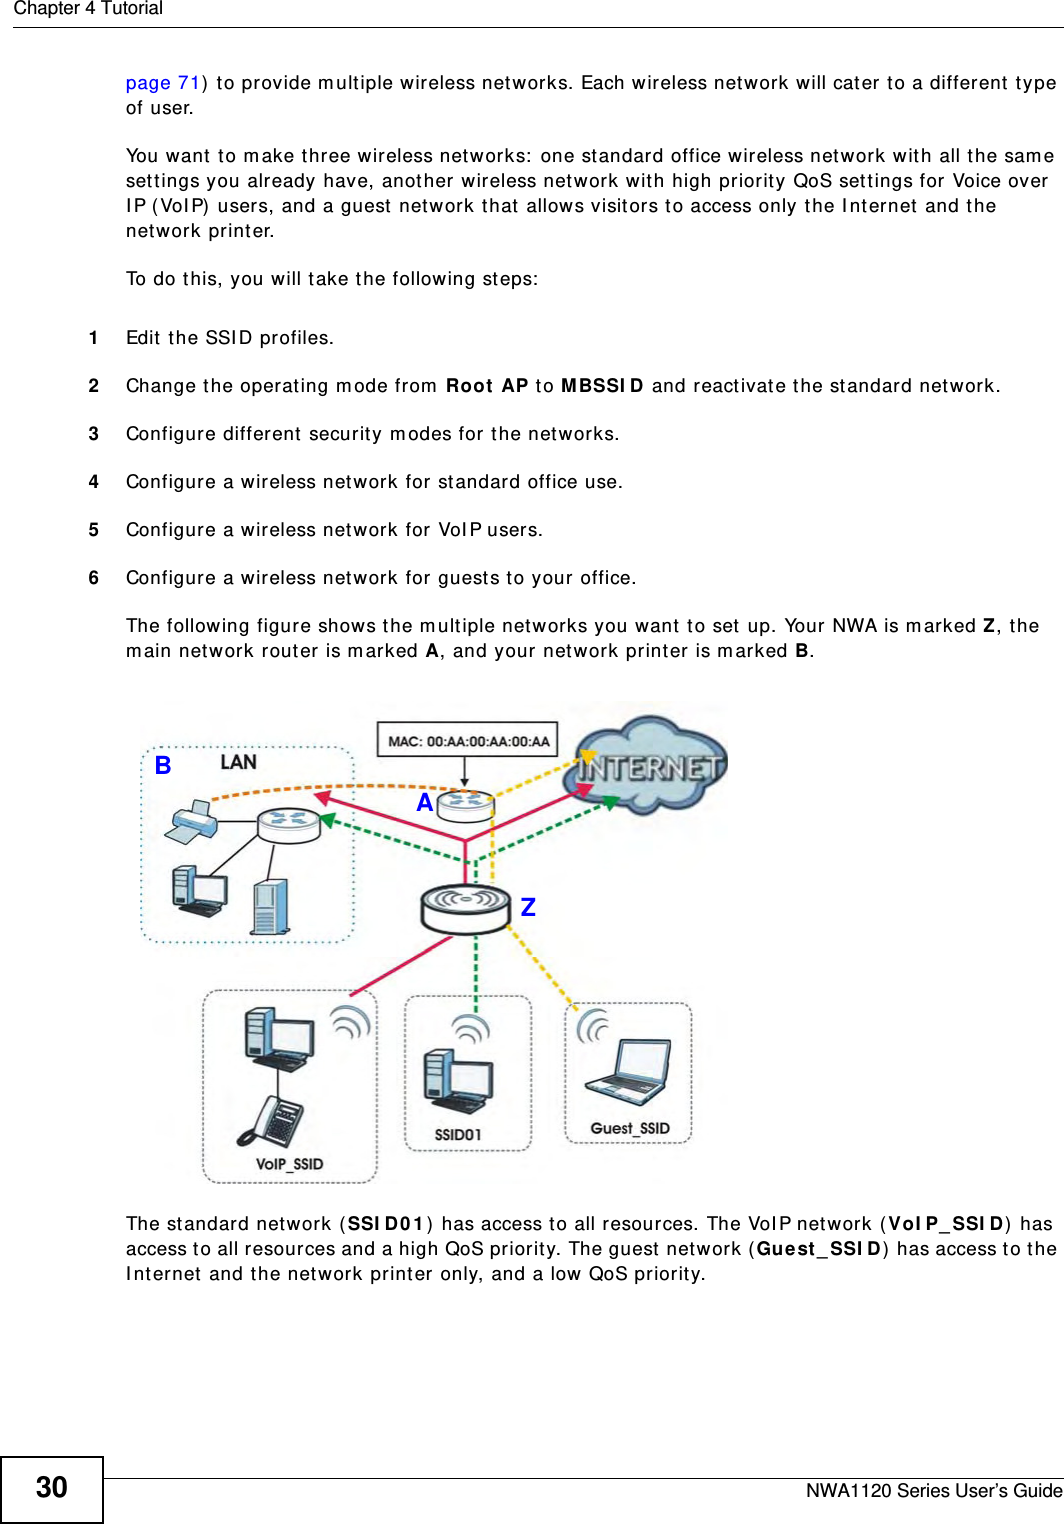 Chapter 4 TutorialNWA1120 Series User’s Guide30page 71) to provide multiple wireless networks. Each wireless network will cater to a different type of user.You want to make three wireless networks: one standard office wireless network with all the same settings you already have, another wireless network with high priority QoS settings for Voice over IP (VoIP) users, and a guest network that allows visitors to access only the Internet and the network printer.To do this, you will take the following steps:1Edit the SSID profiles.2Change the operating mode from Root AP to MBSSID and reactivate the standard network.3Configure different security modes for the networks.4Configure a wireless network for standard office use.5Configure a wireless network for VoIP users.6Configure a wireless network for guests to your office.The following figure shows the multiple networks you want to set up. Your NWA is marked Z, the main network router is marked A, and your network printer is marked B.The standard network (SSID01) has access to all resources. The VoIP network (VoIP_SSID) has access to all resources and a high QoS priority. The guest network (Guest_SSID) has access to the Internet and the network printer only, and a low QoS priority.ZAB